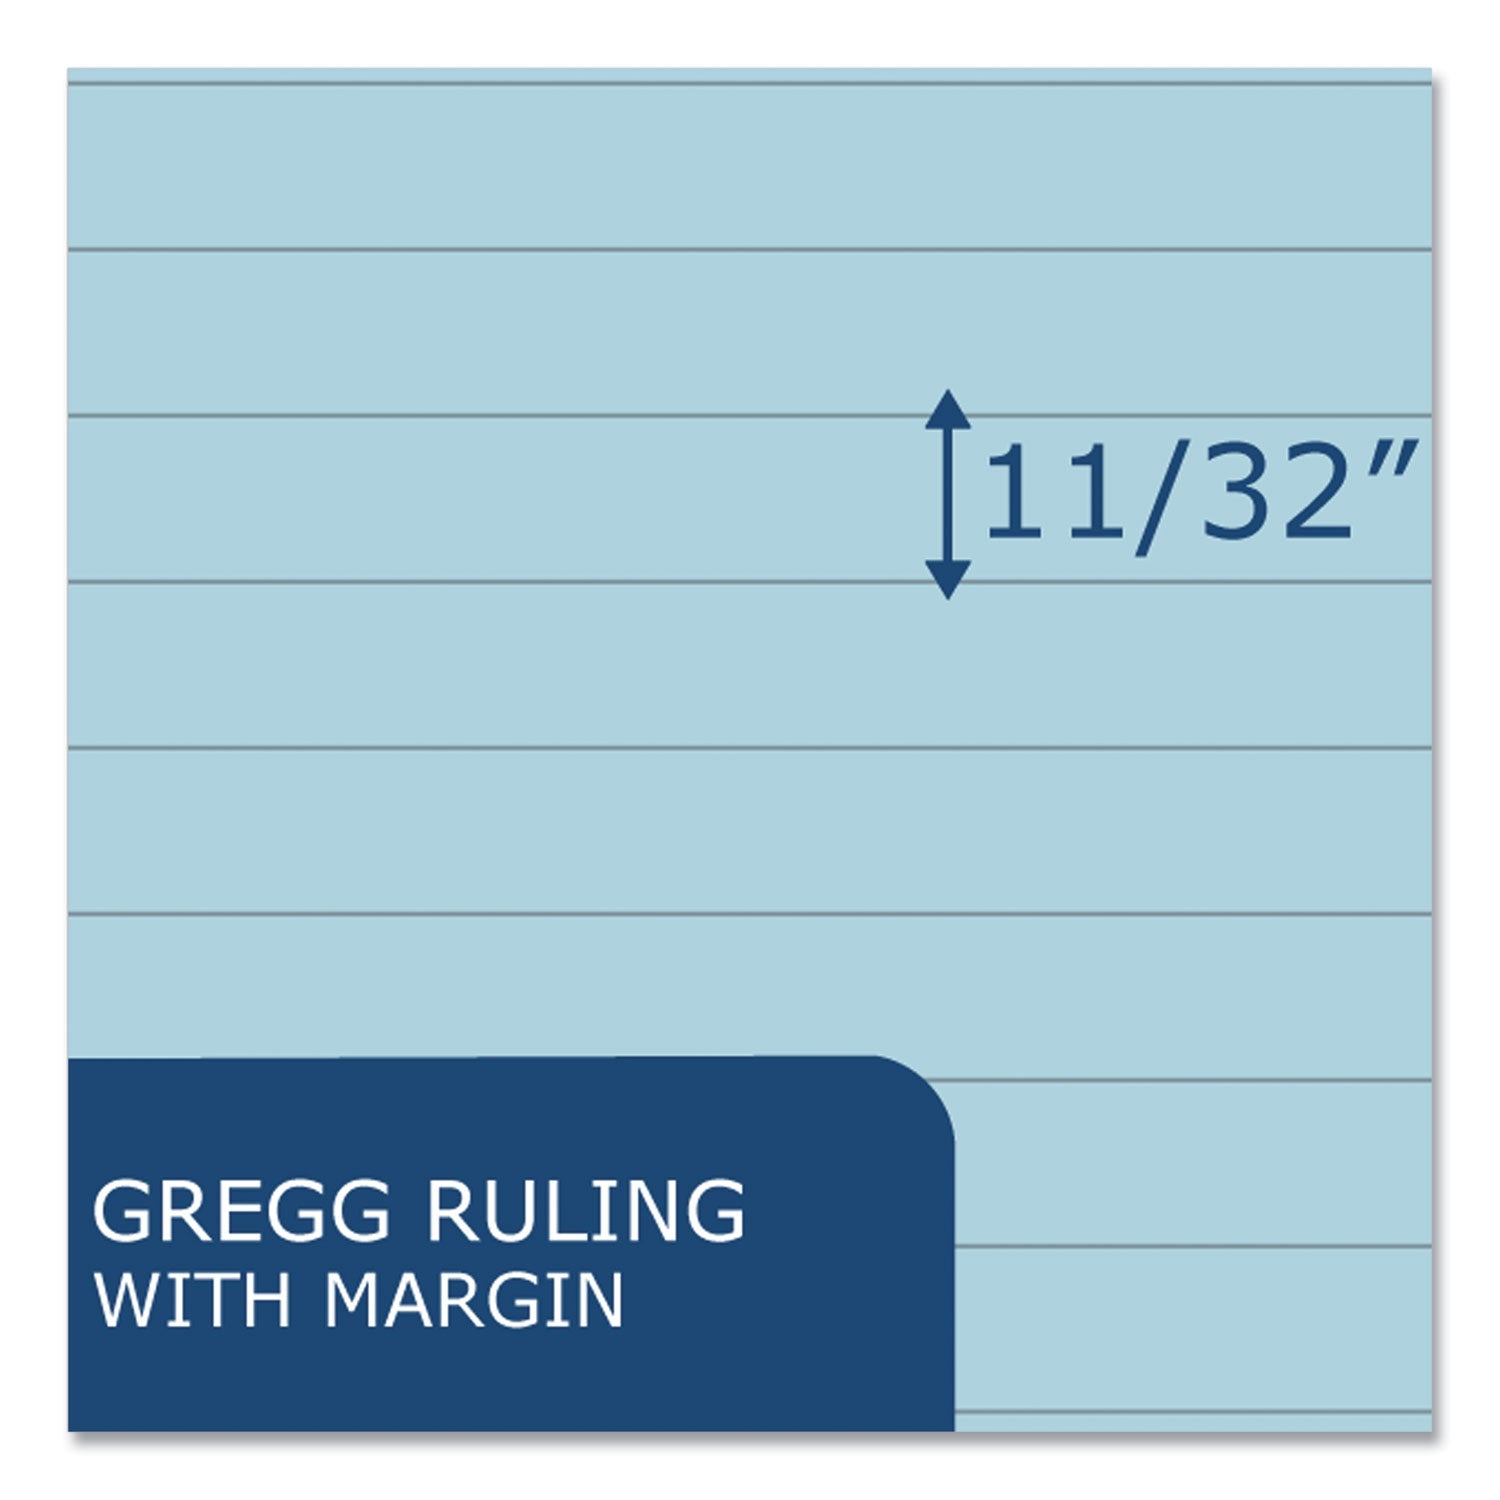 Enviroshades Steno Notepad, Gregg Rule, White Cover, 80 Blue 6 x 9 Sheets, 4/Pack - 